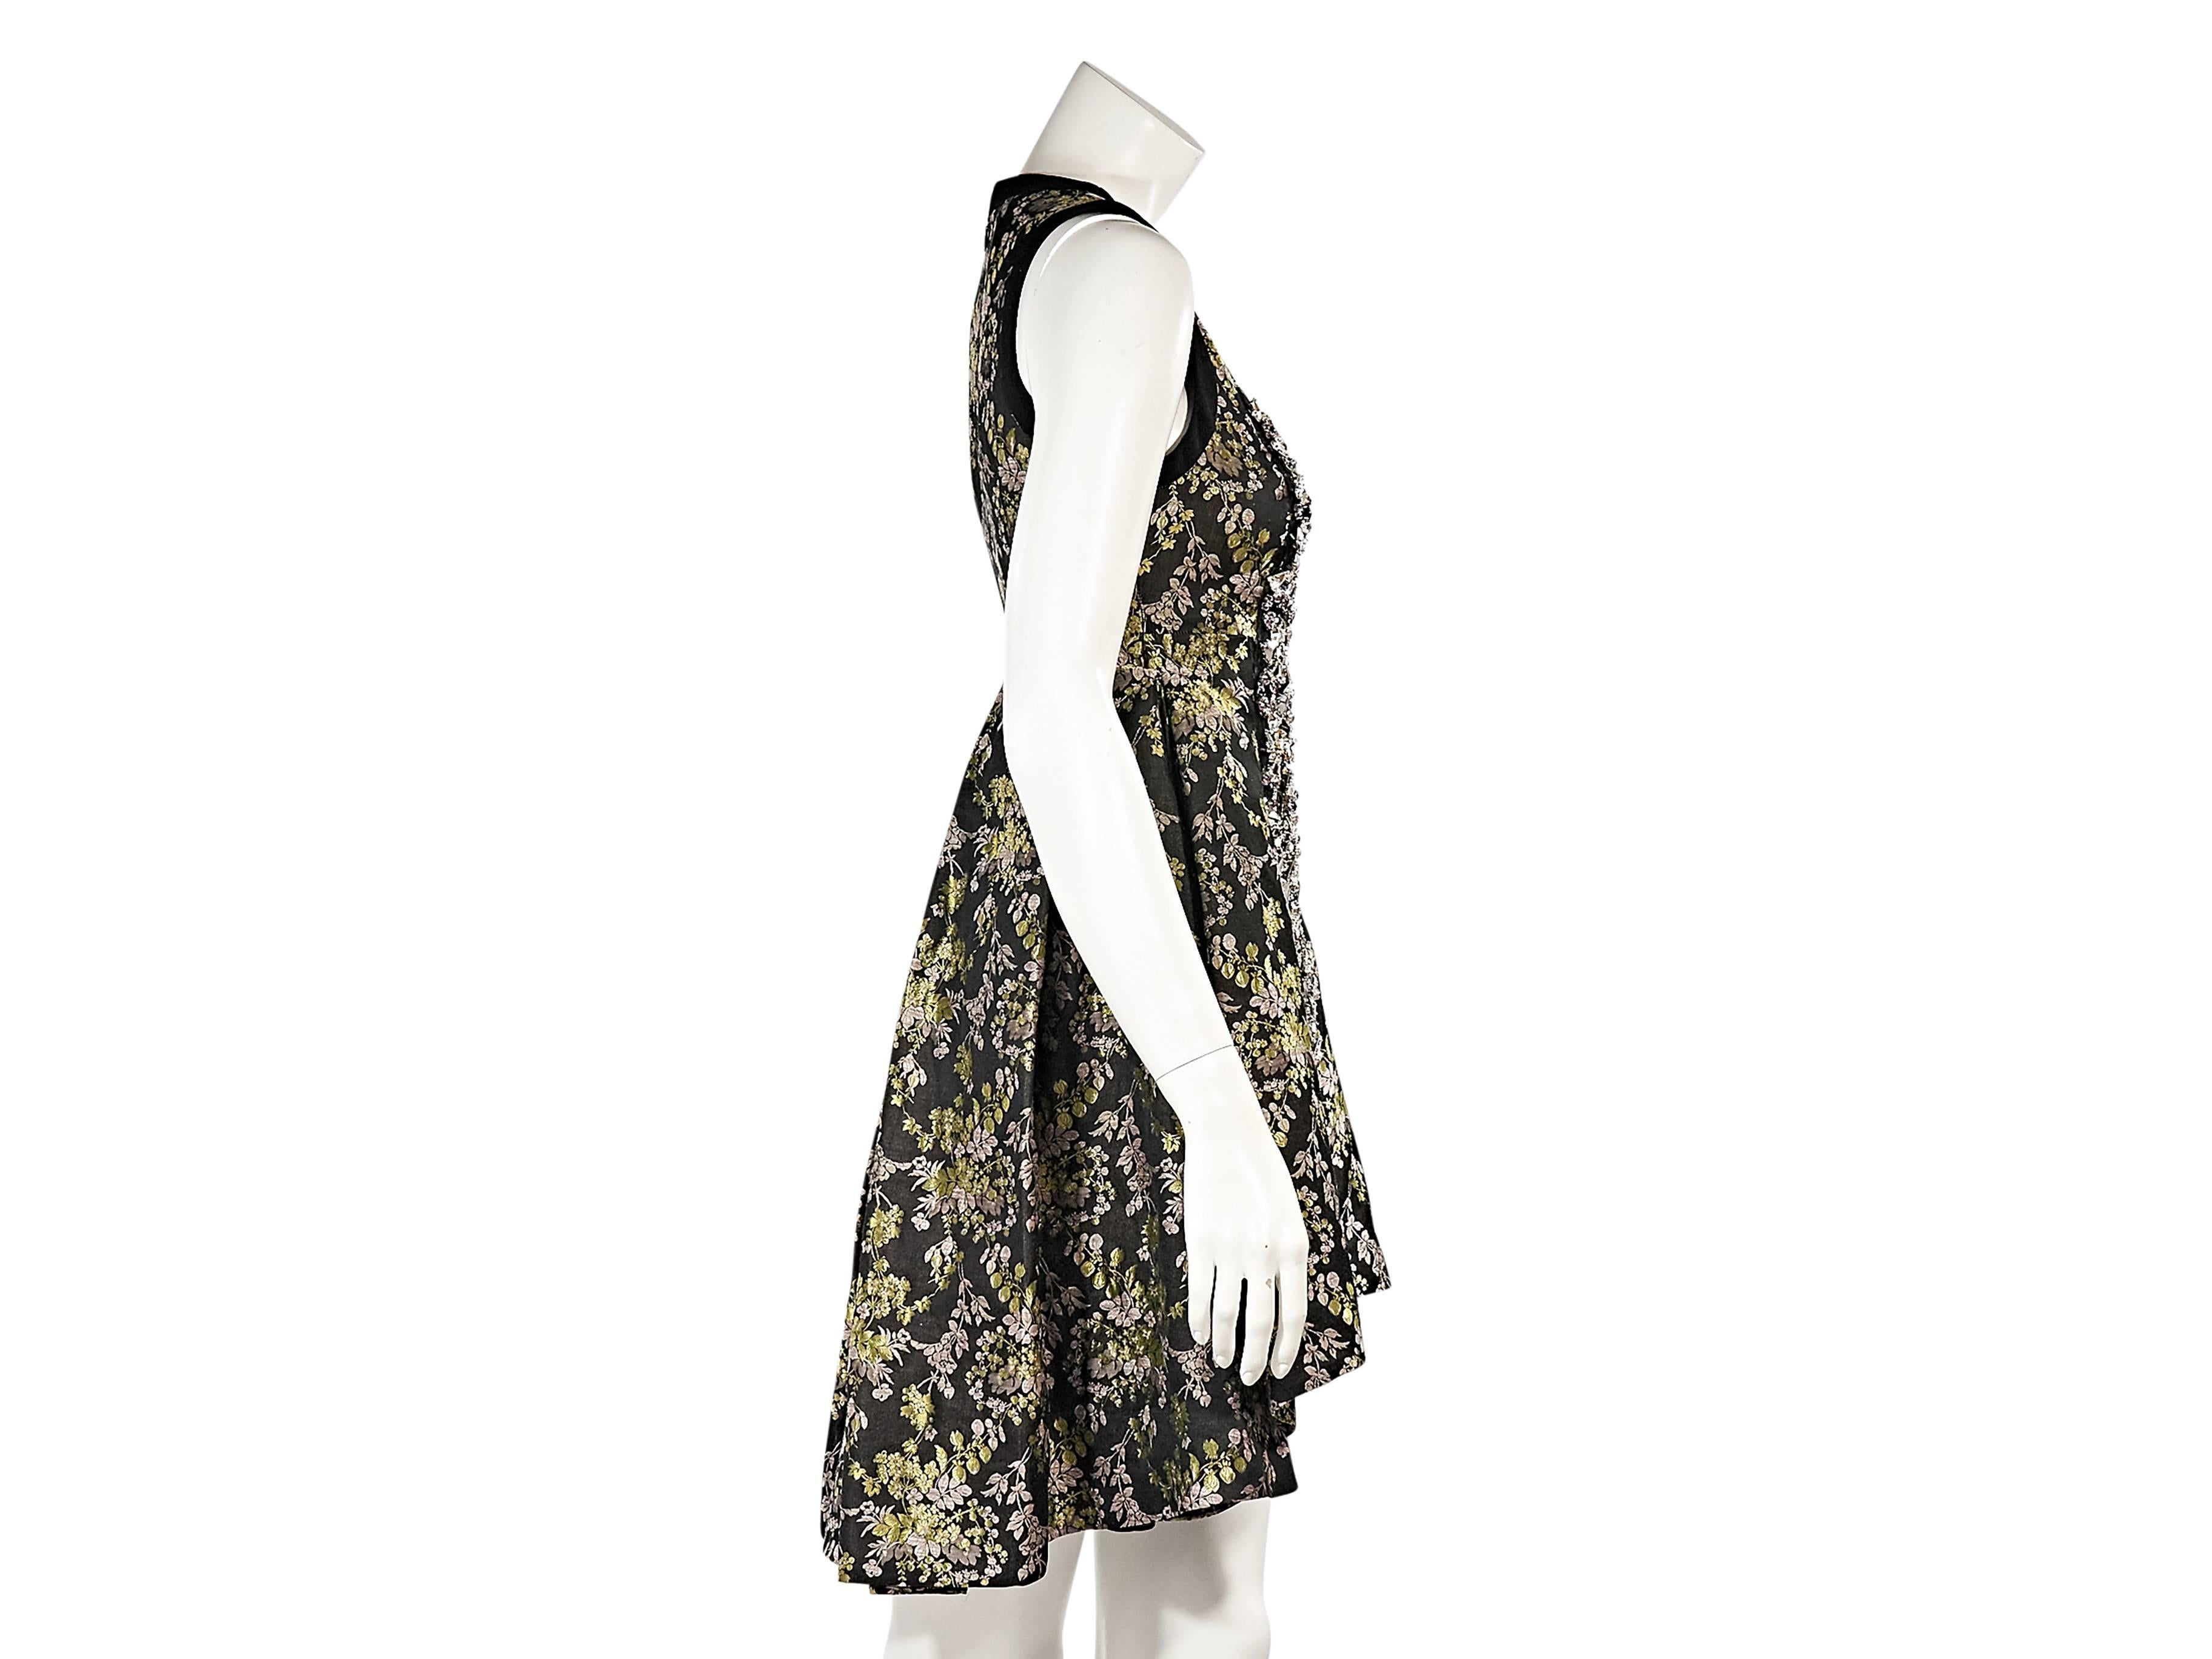 Product details:  Embellished front floral-printed dress by Vera Wang.  Scoopneck.  Sleeveless.  Concealed back zip closure.  Pleated back creates full skirting.  Hi-lo hem. 
Condition: Excellent. 
Estimated Retail: $2,990